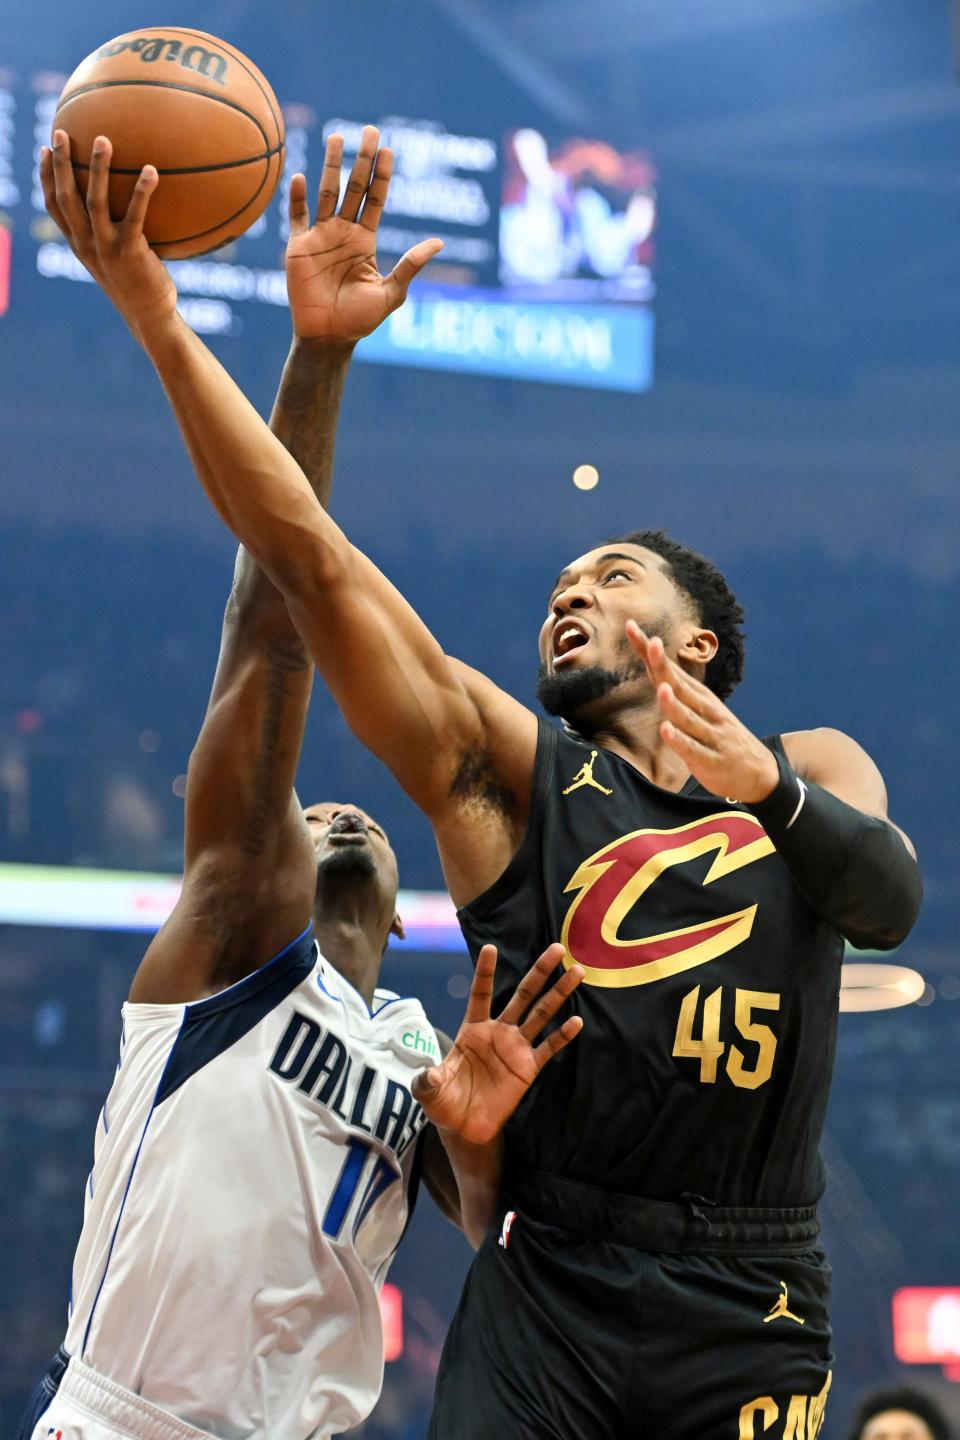 Cleveland Cavaliers guard Donovan Mitchell (45) shoots against Dallas Mavericks forward Dorian Finney-Smith, left, during the first half of an NBA basketball game, Saturday, Dec. 17, 2022, in Cleveland. (AP Photo/Nick Cammett)